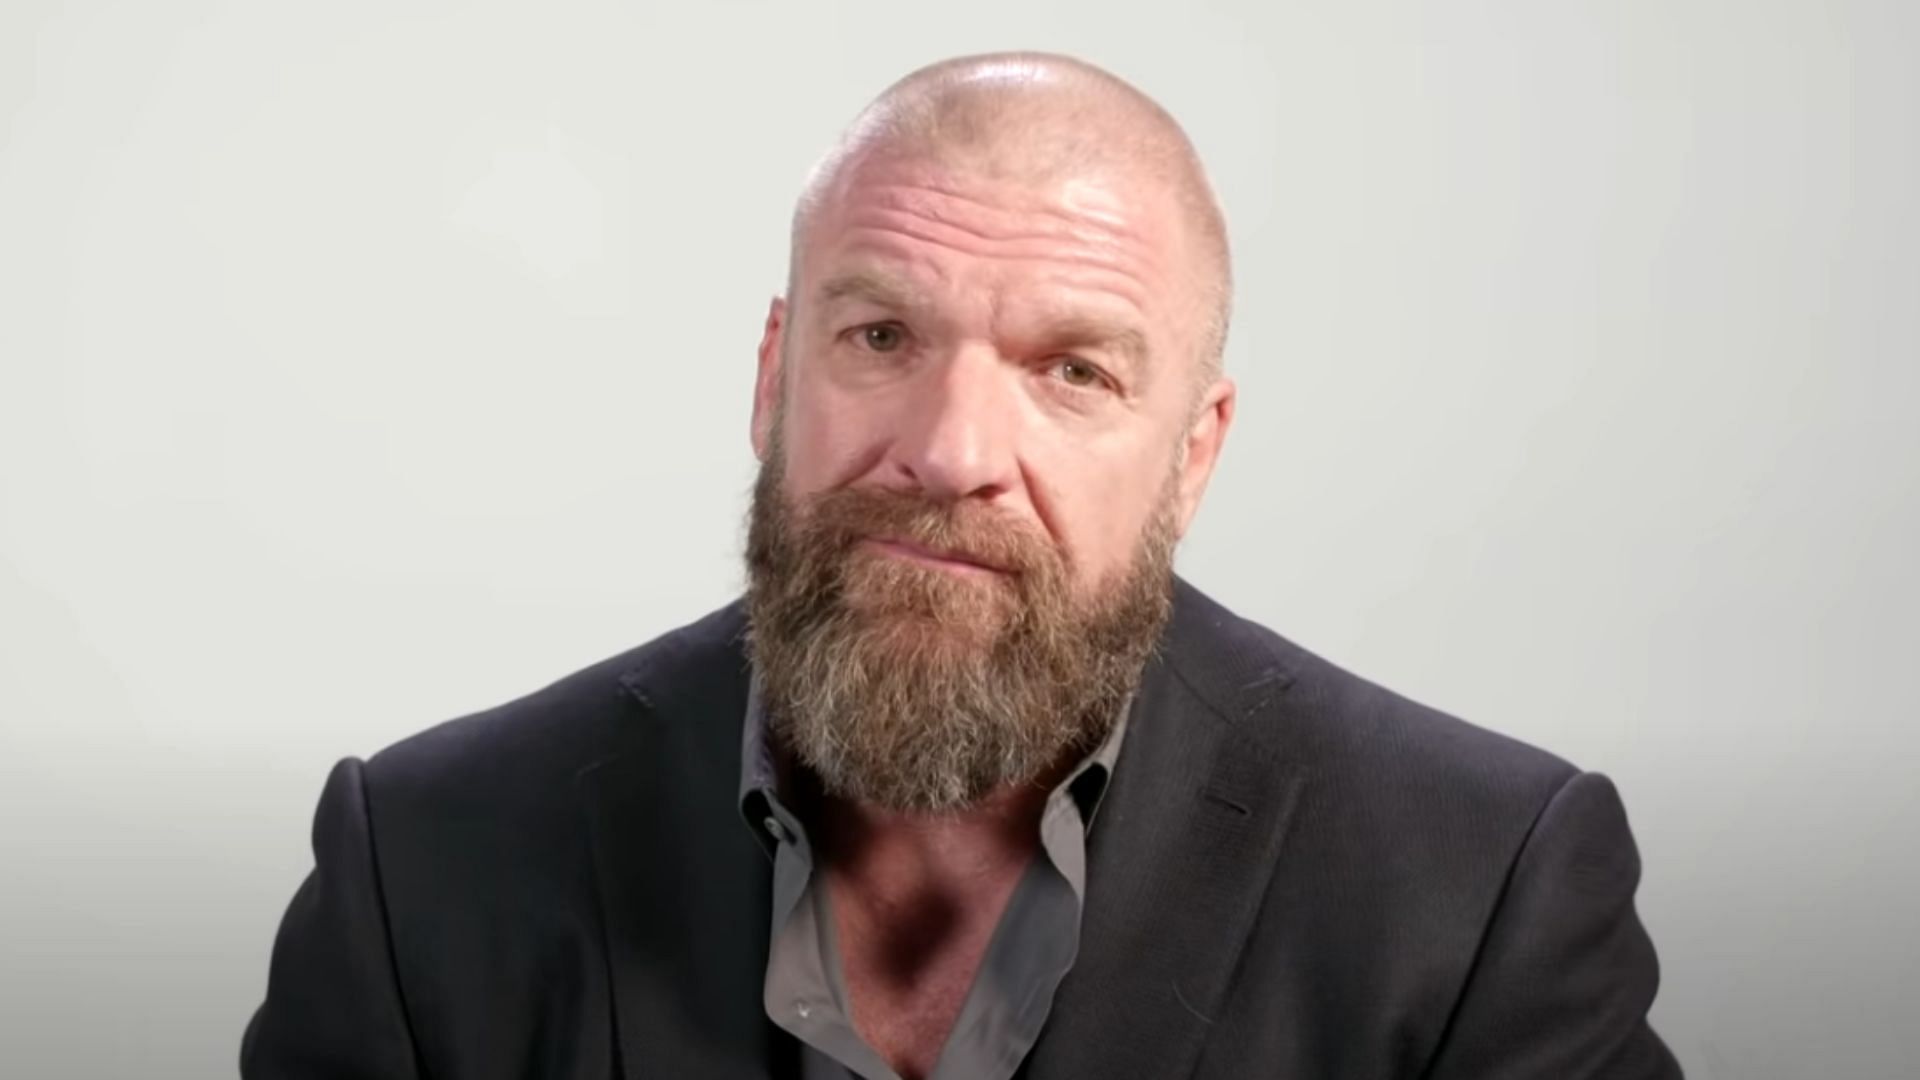 NXT founder and current WWE Chief Content Officer Triple H